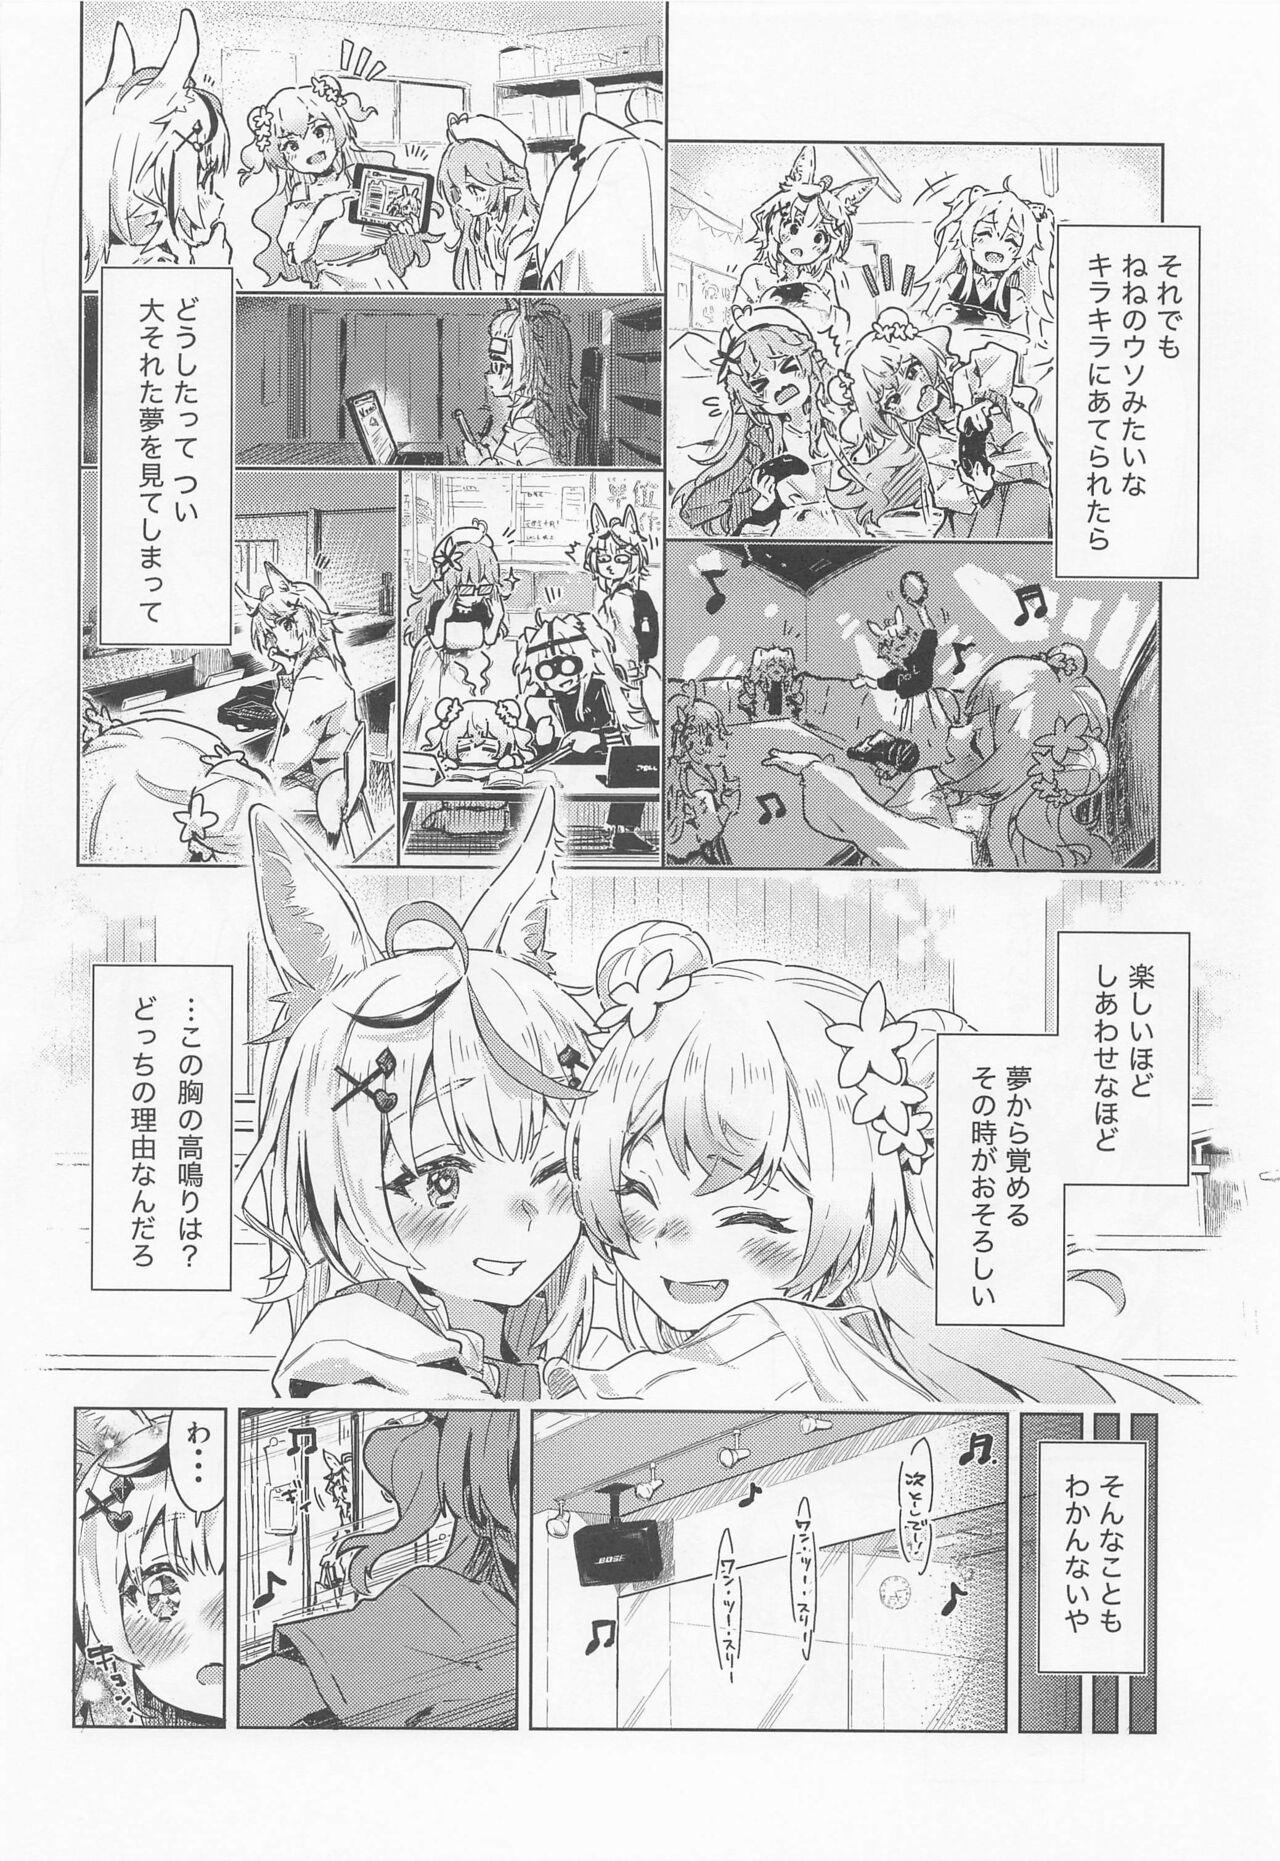 Fennec wa Iseijin no Yume o Miru ka - Does The Fennec Dream of The Lovely Visitor? 4